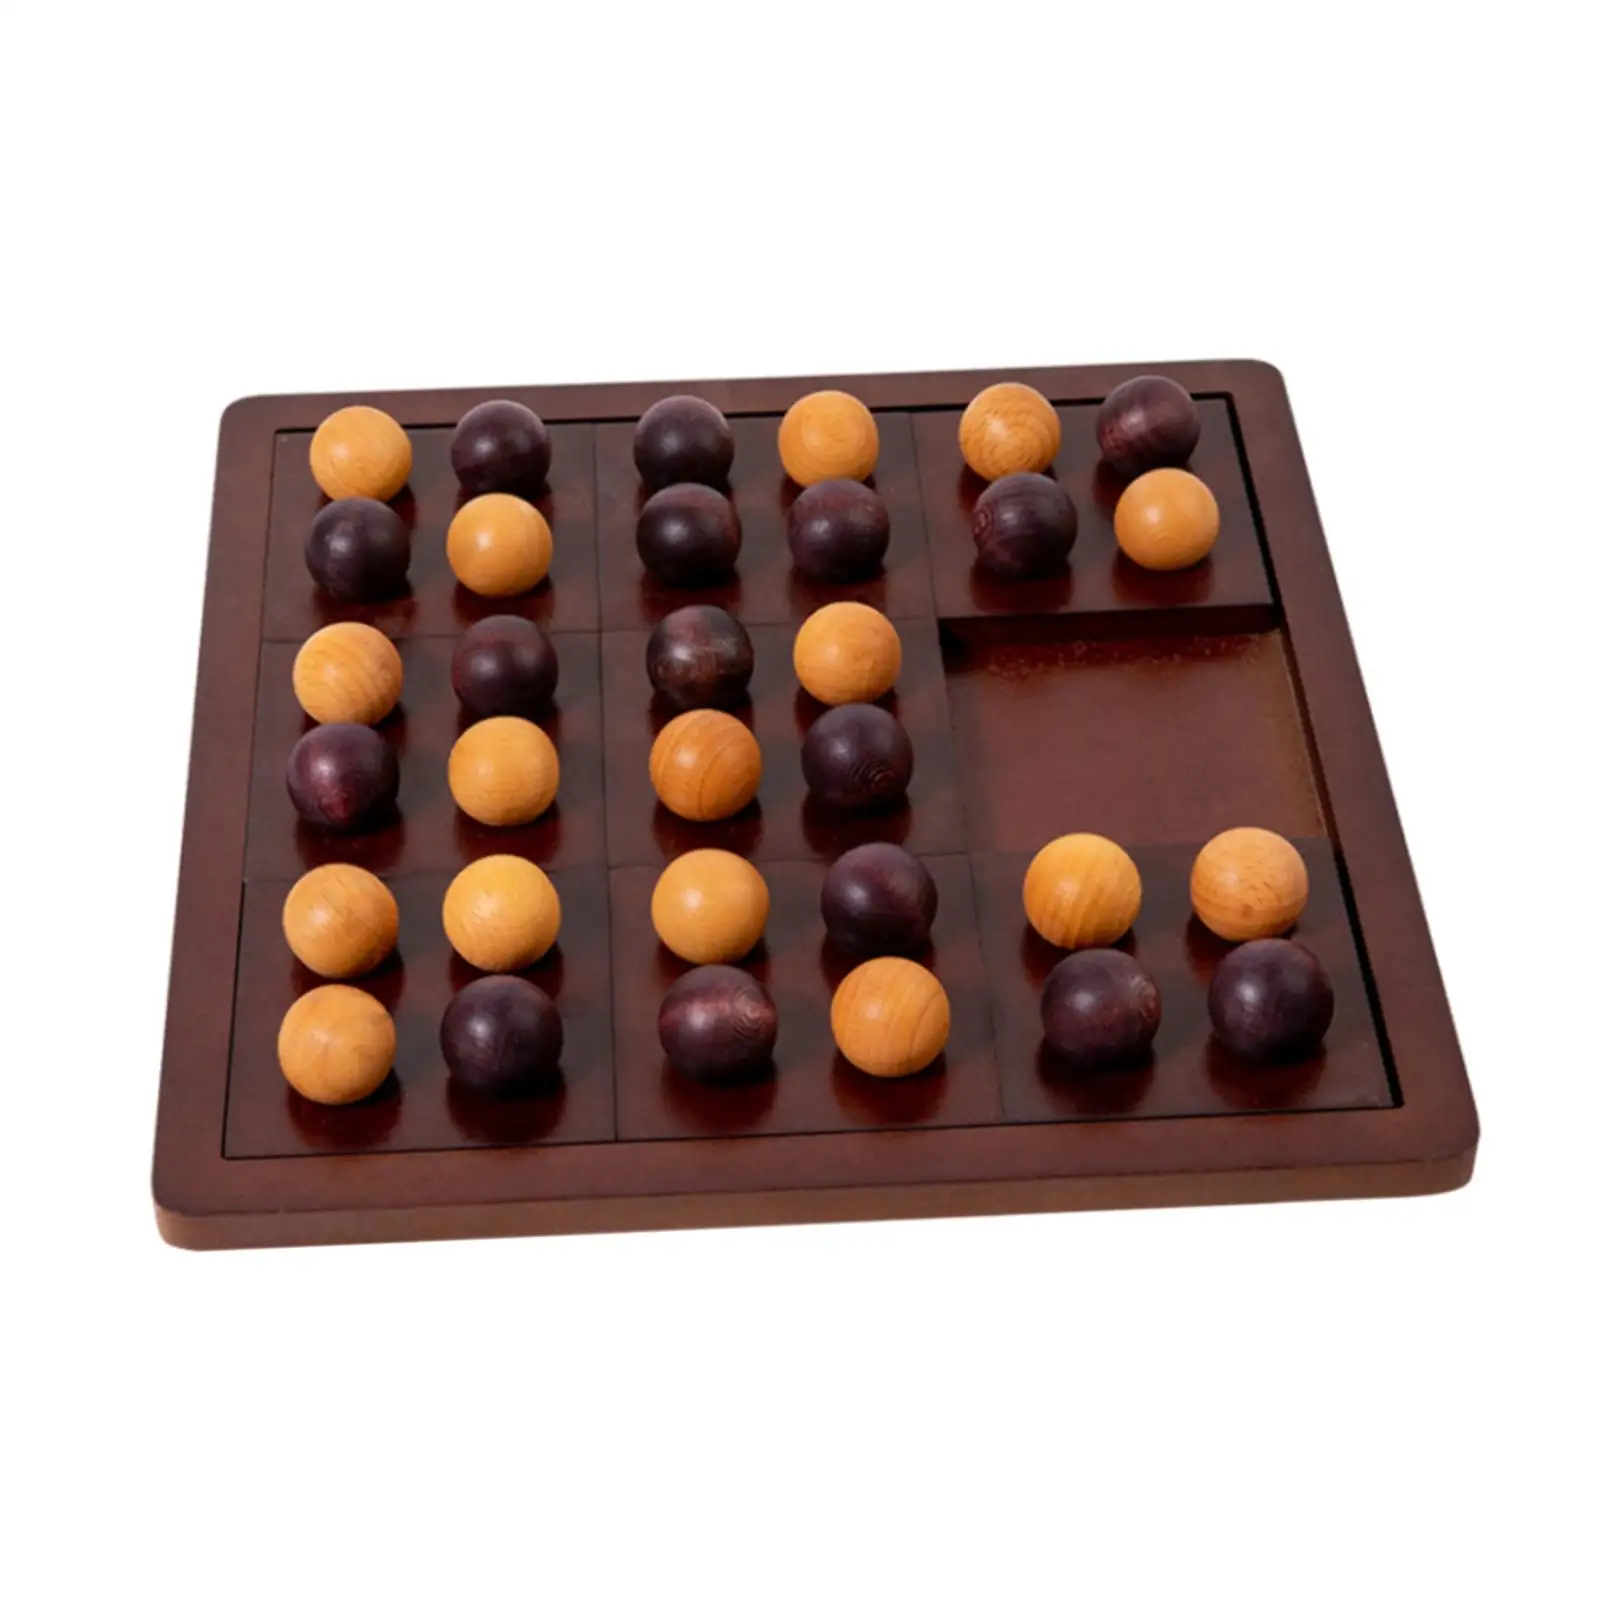 Tic TAC Toe Game Classical Interactive Chess Toy Early Education Puzzle for Kids Adults Families Indoor Outdoor Travel